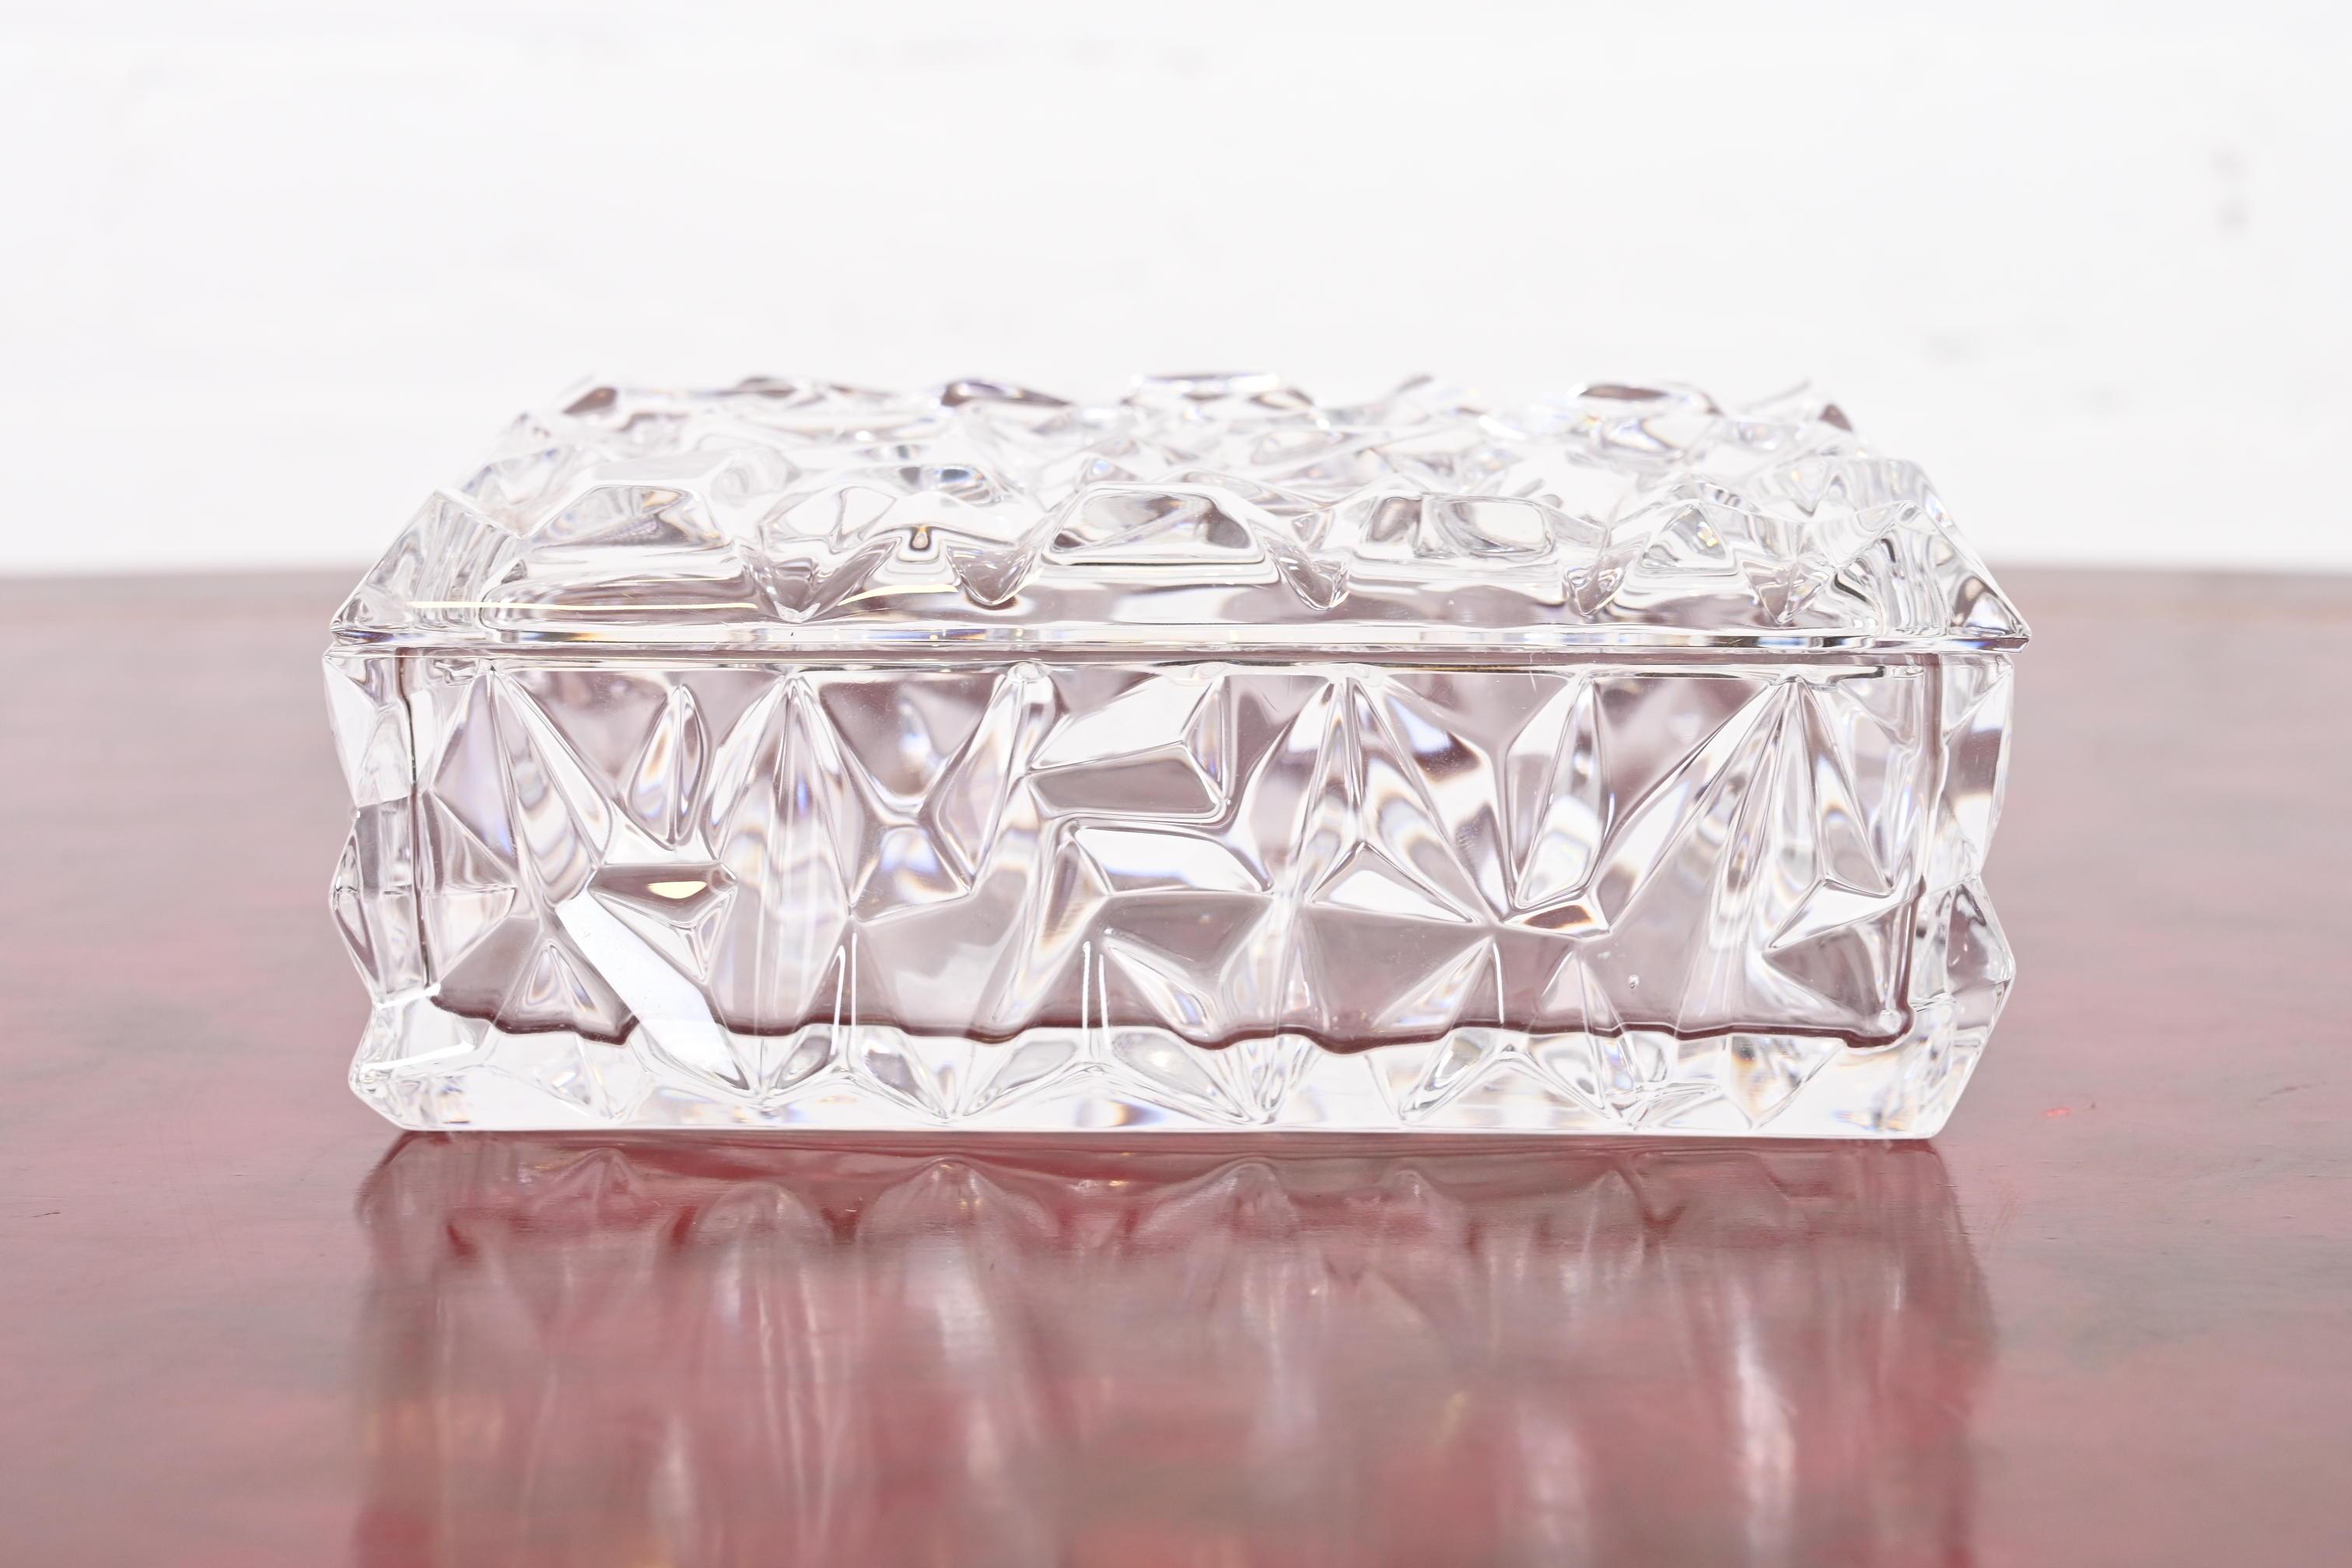 A gorgeous faceted crystal dresser box

By Tiffany & Co. (signed at the base)

USA, Late 20th Century

Measures: 6.5